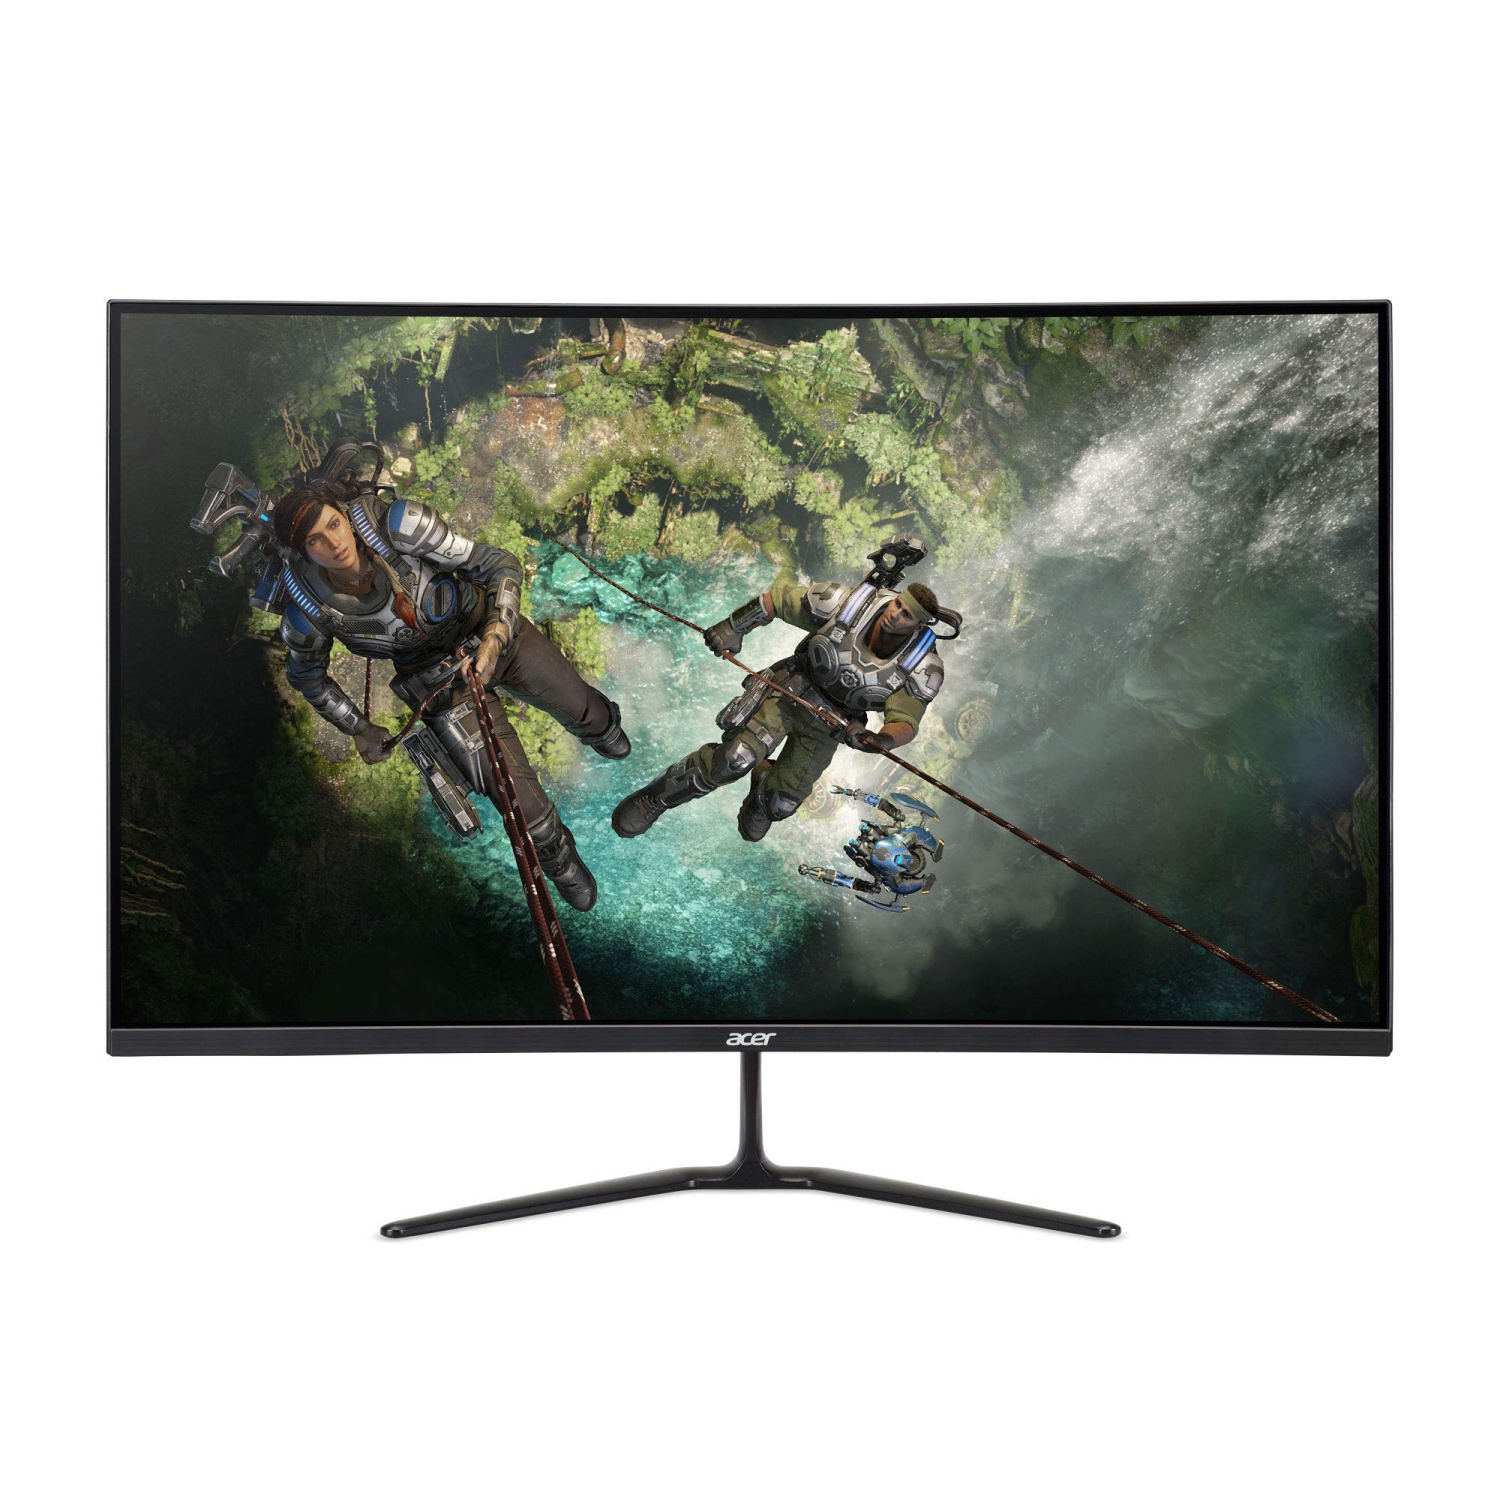 Acer ED320QR Sbiipx 31.5" 1800R Curved Full HD (1920 x 1080) Monitor // 165Hz Refresh Rate / 1ms Response Time/Contrast Ratio: 4,000:1 / AMD Radeon FreeSync